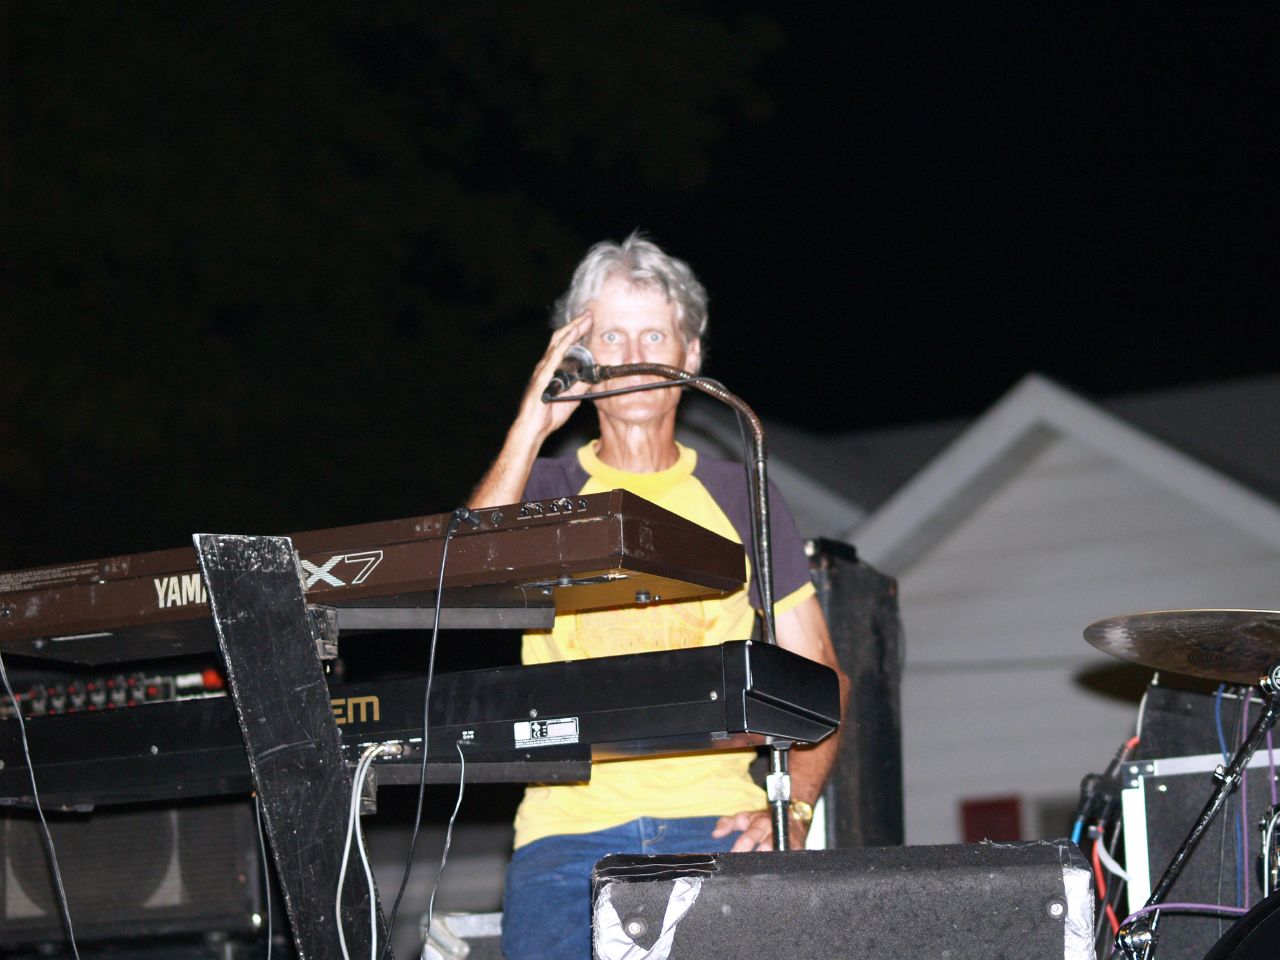 a man is playing on keyboards with the music equipment